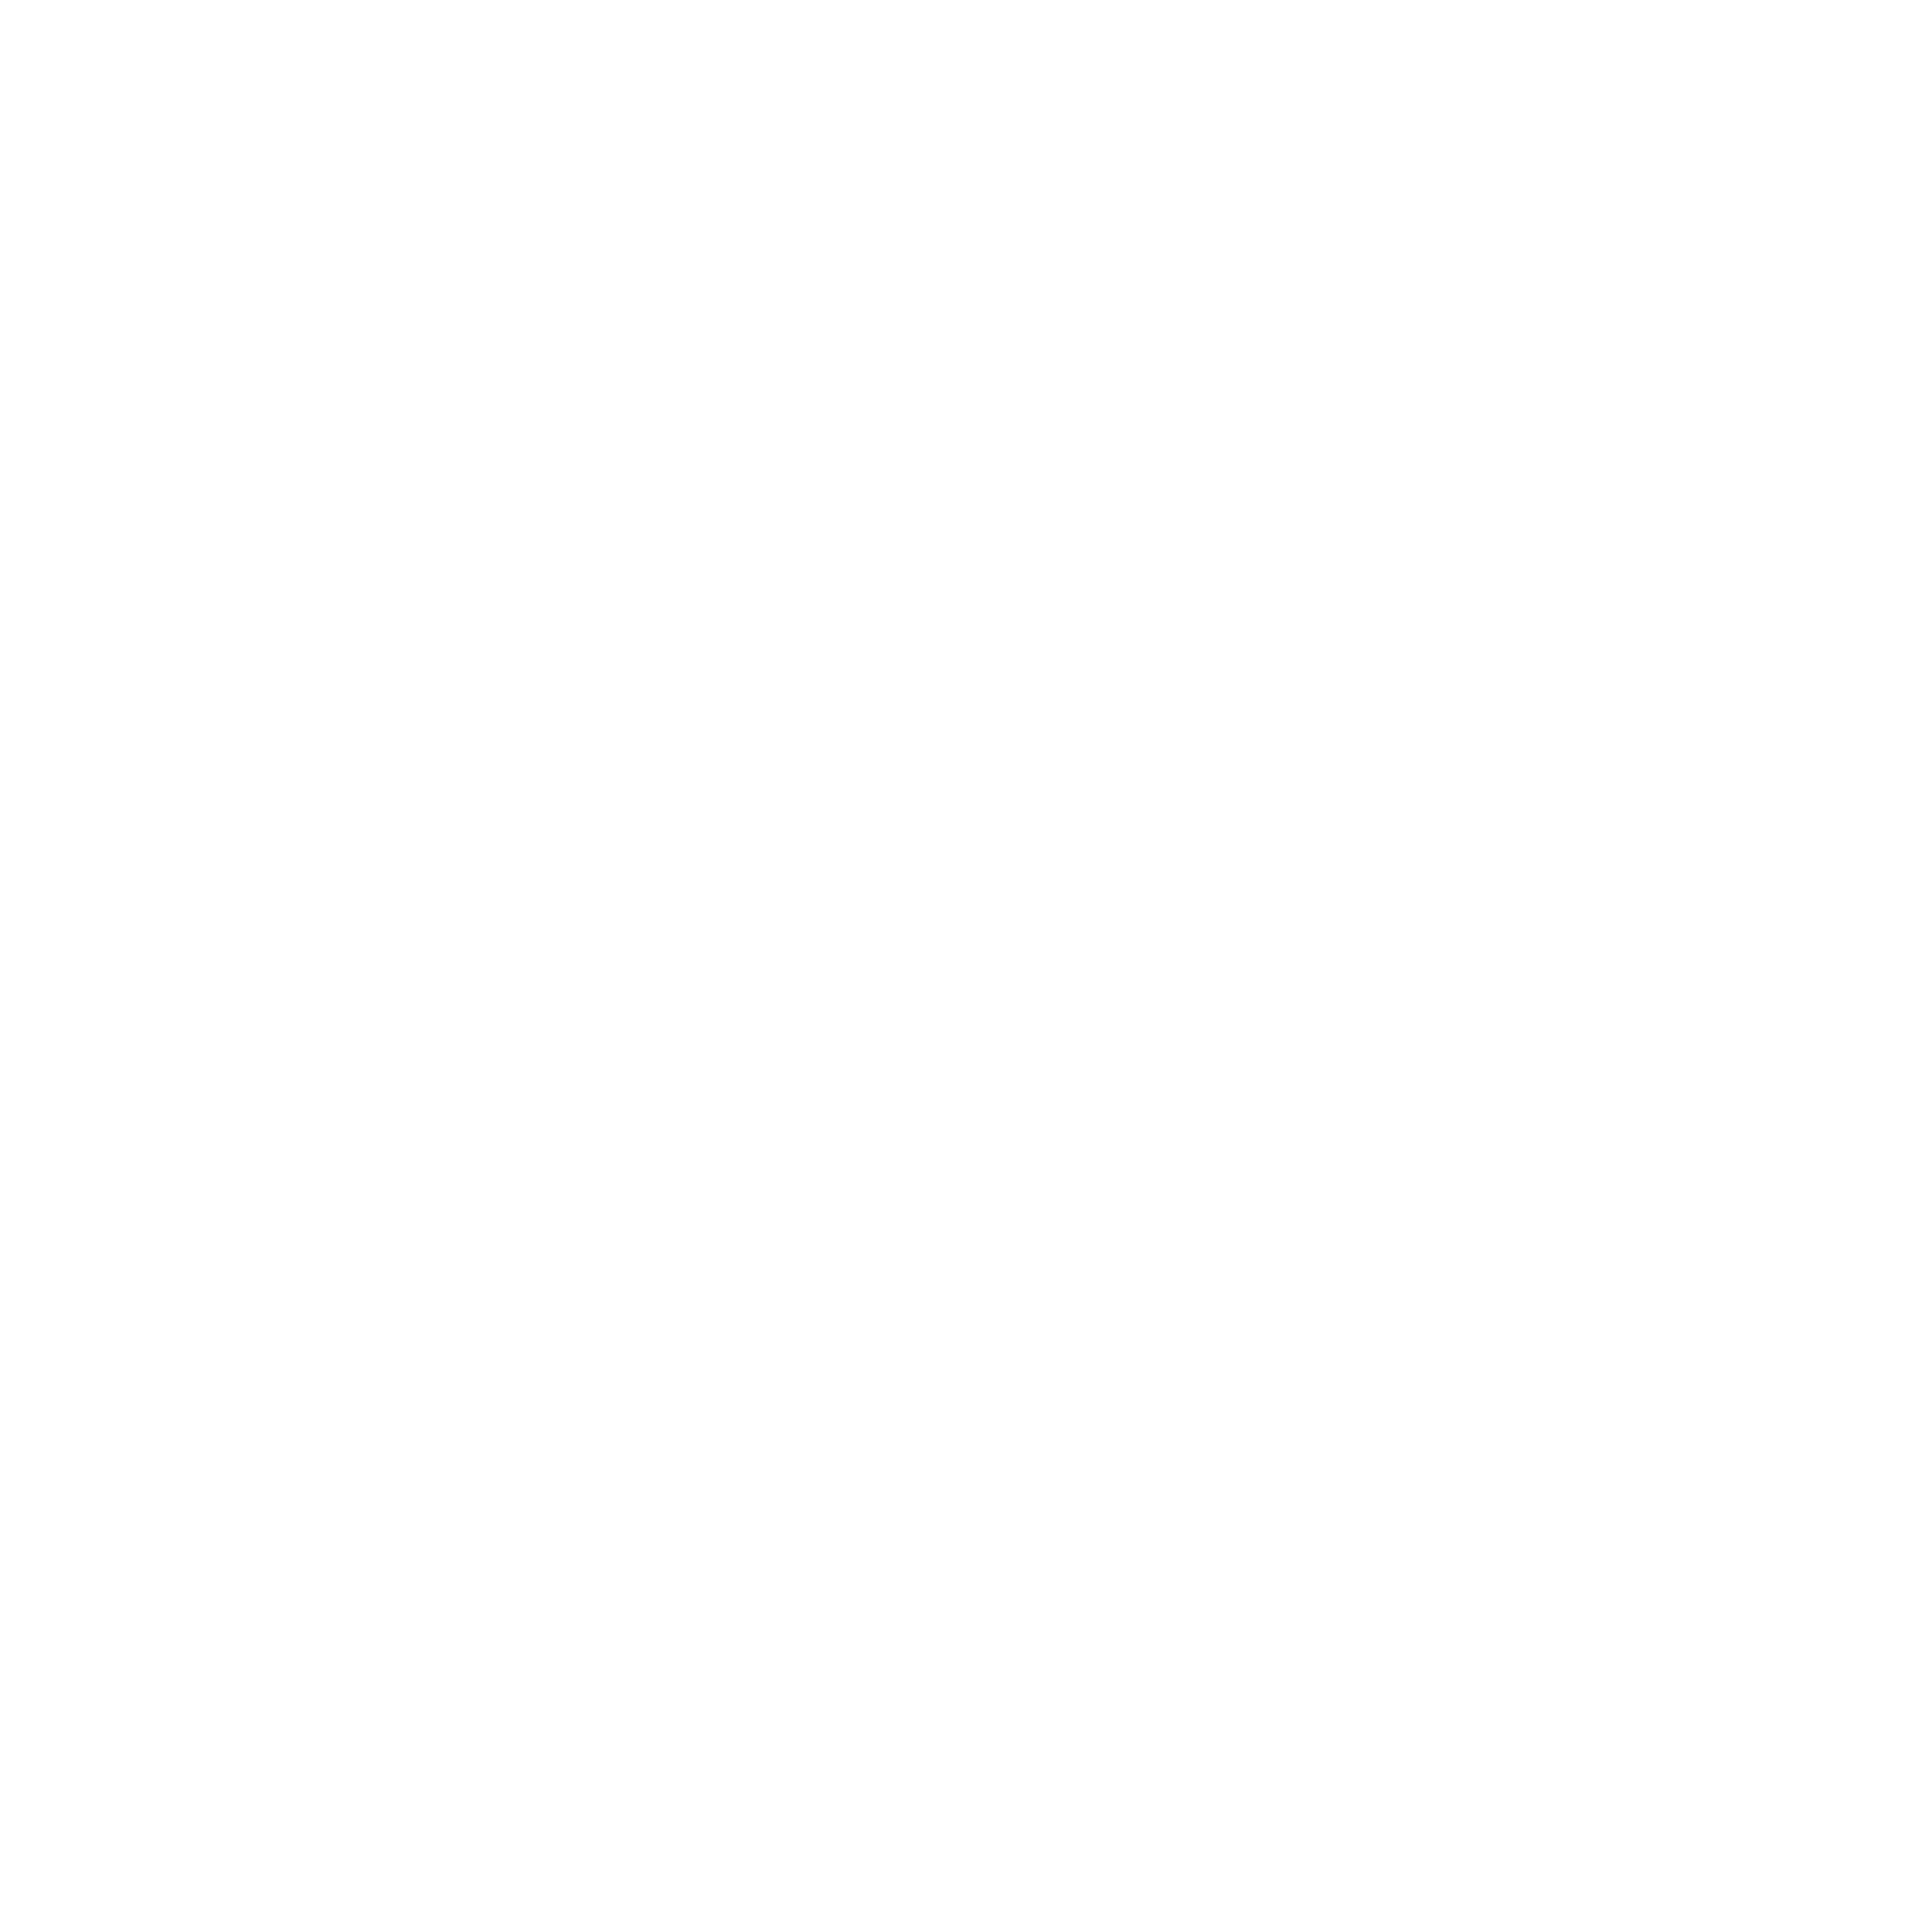 Mortgage District